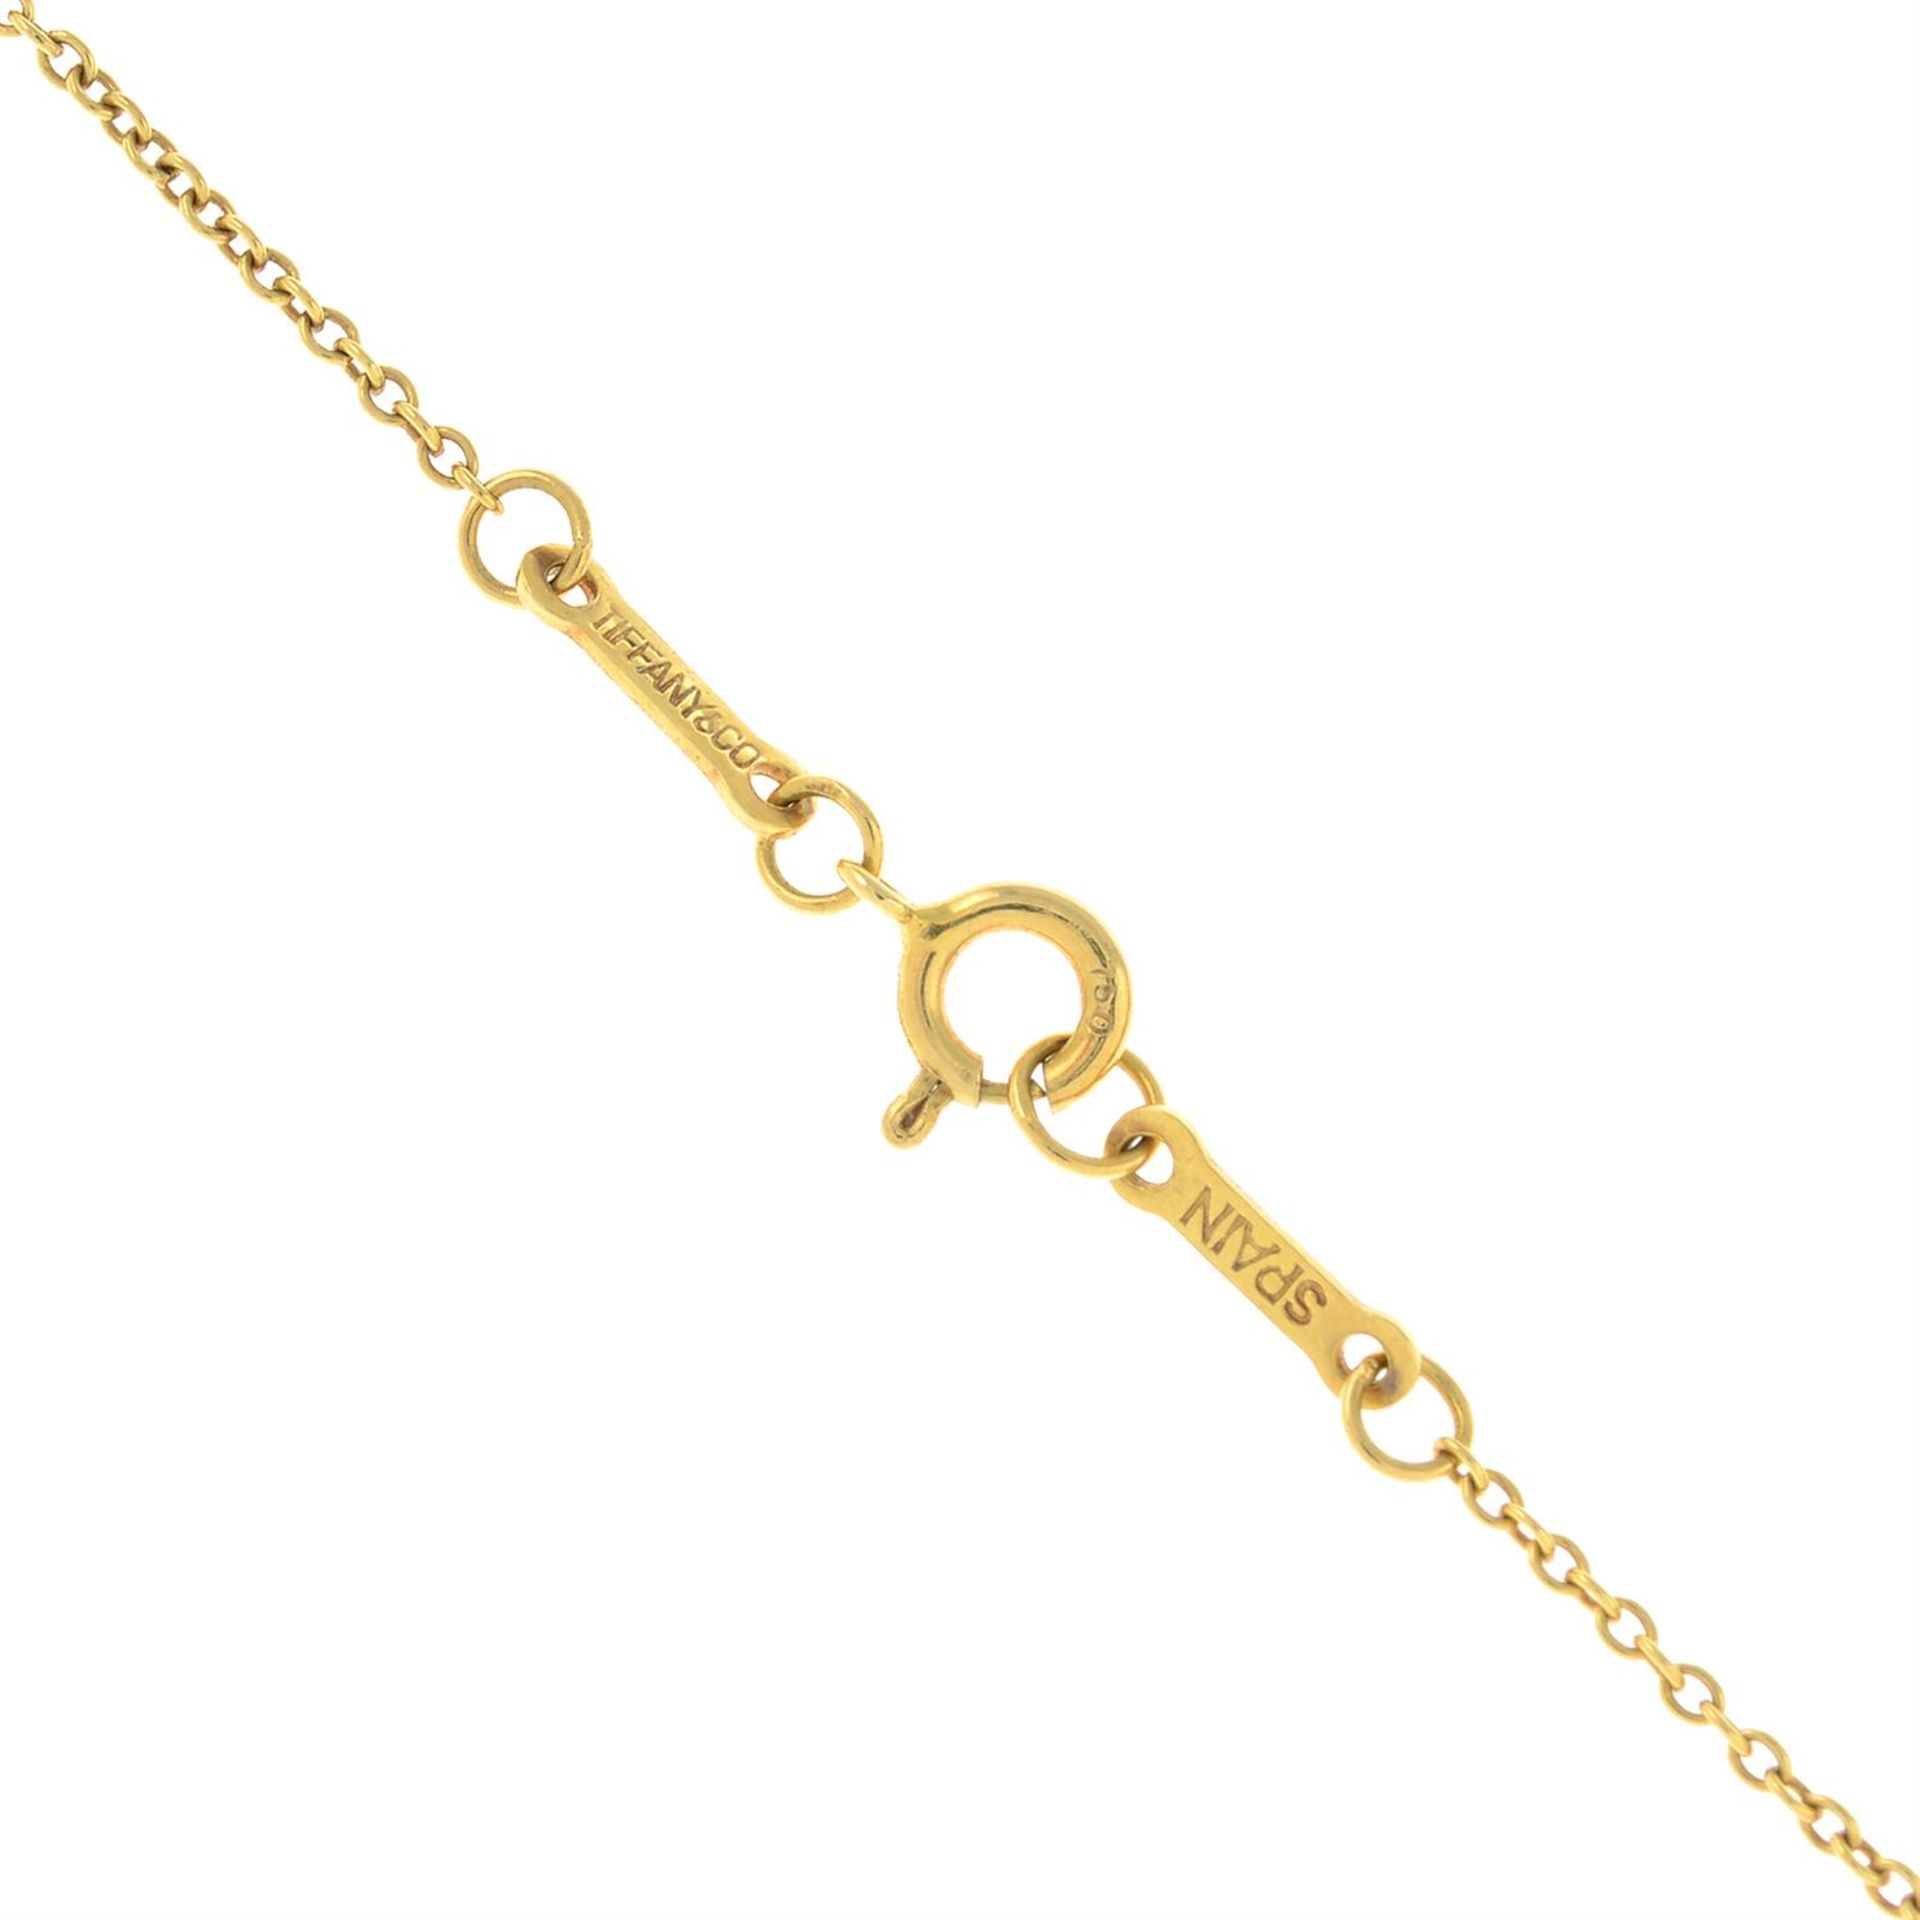 An 'Open Heart' pendant, with chain, by Elsa Peretti for Tiffany & Co. - Image 4 of 4